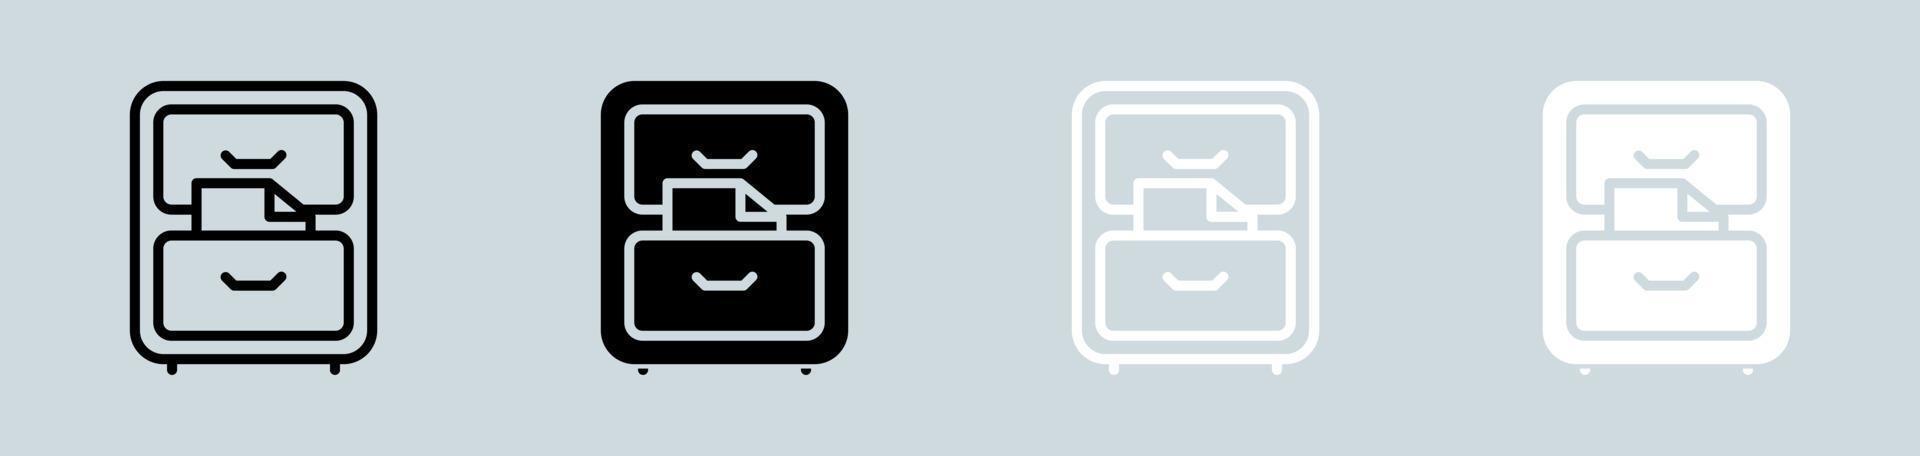 File cabinet icon set in black and white. Archive signs vector illustration.